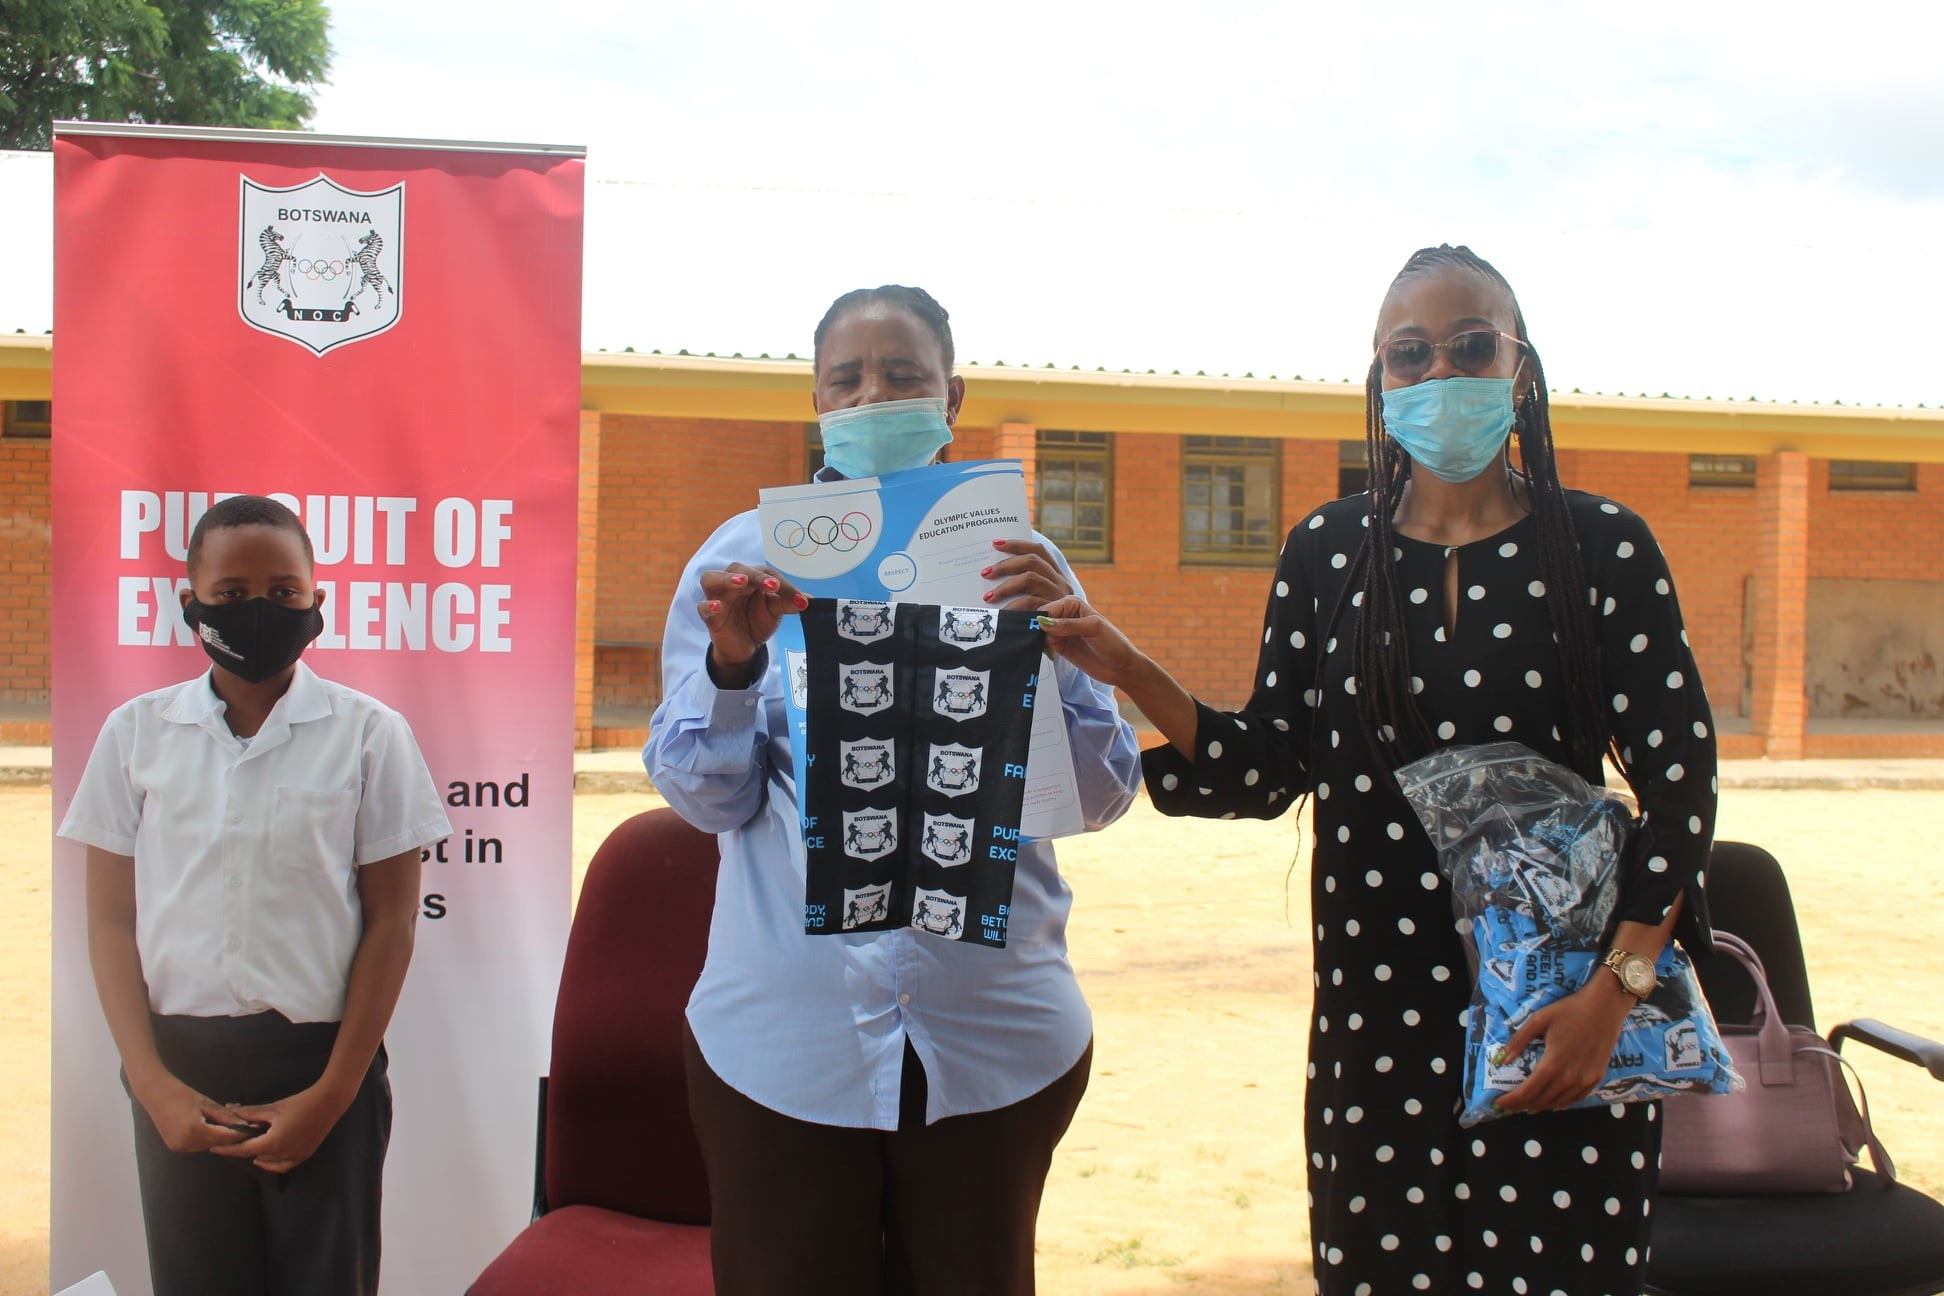 Botswana National Olympic Committee donating masks and hand sanitiser to schools